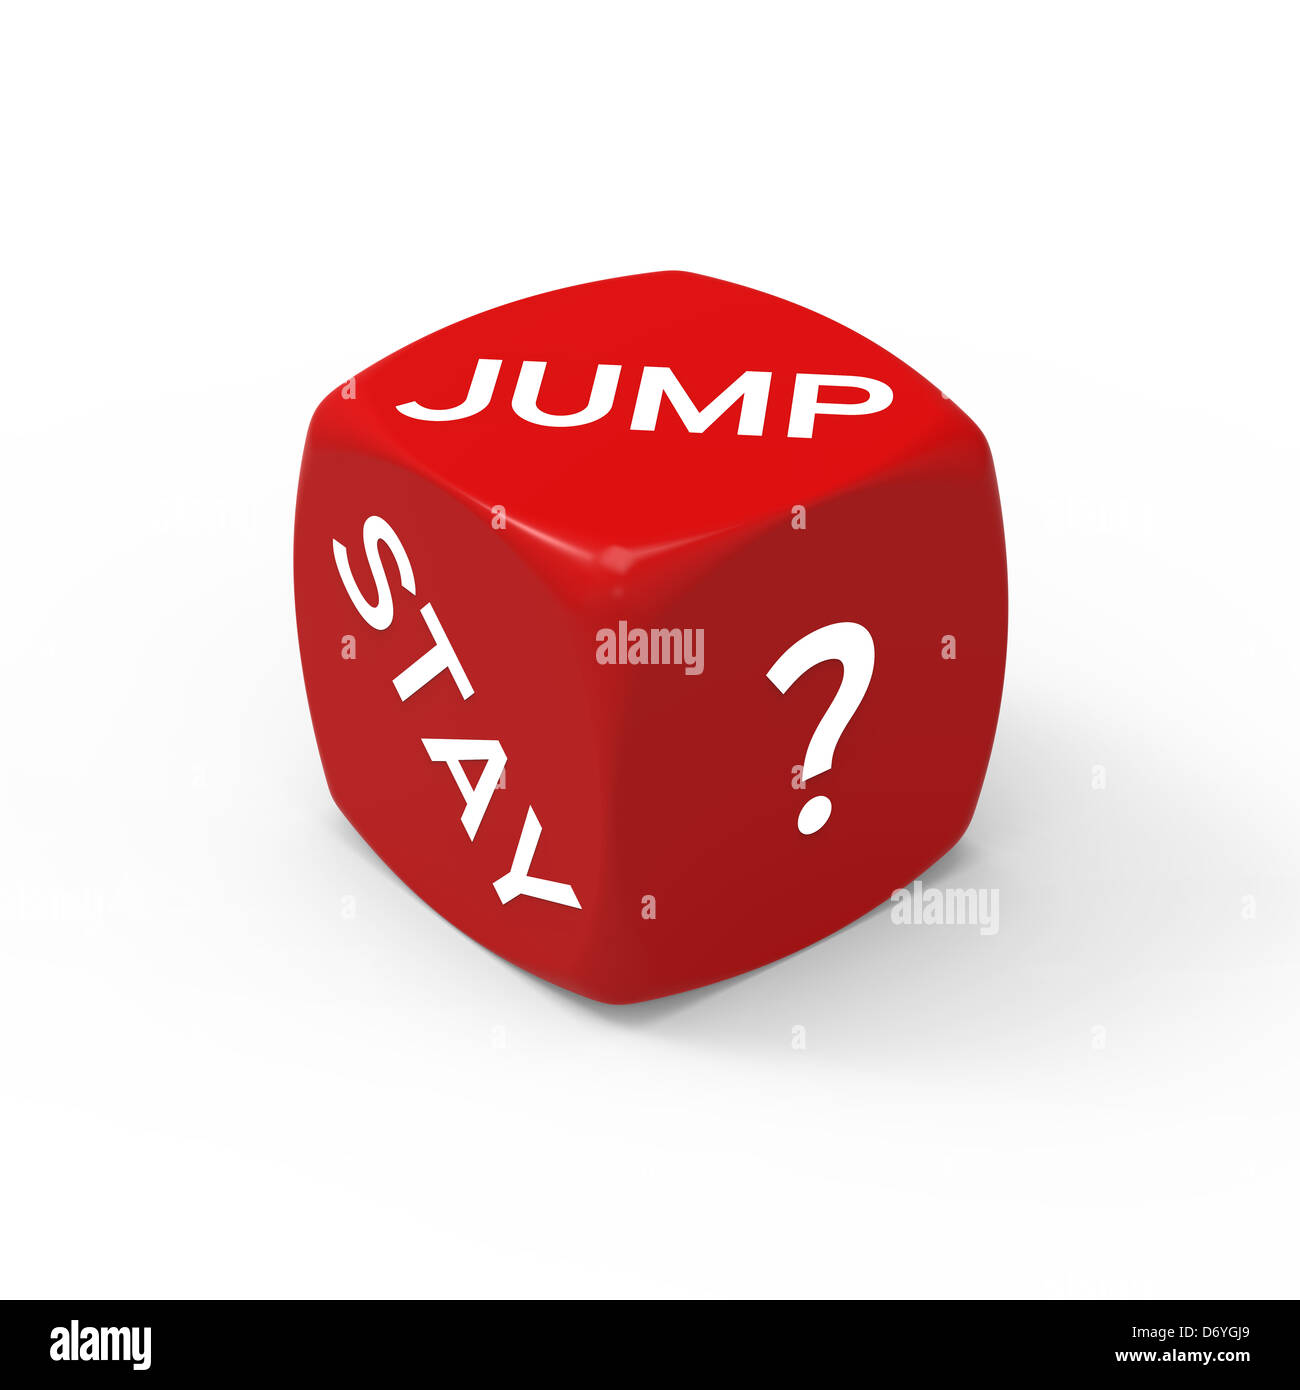 Jump or Stay - How to Make the Right Choice. Stock Photo